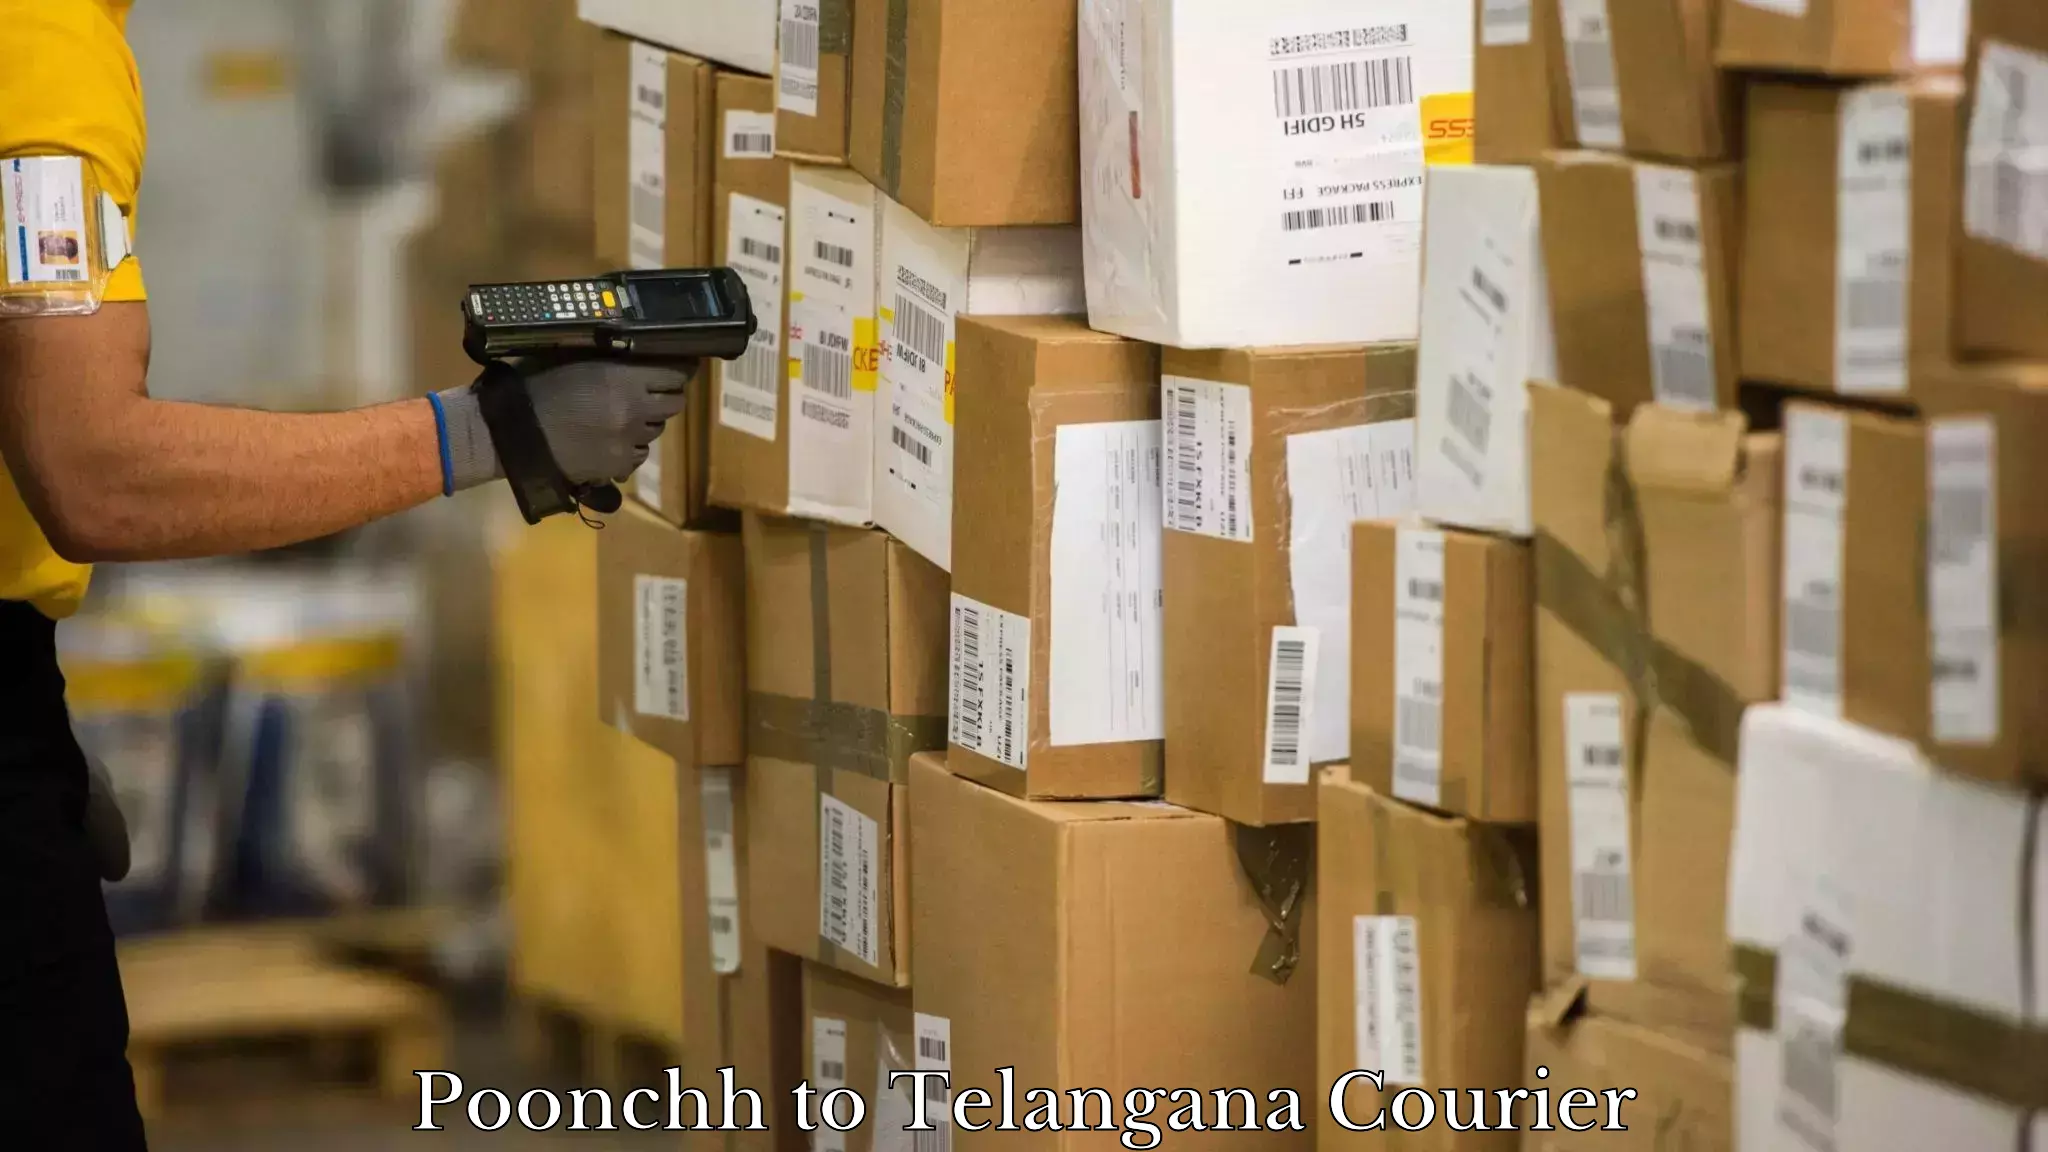 Nationwide shipping capabilities Poonchh to Telangana